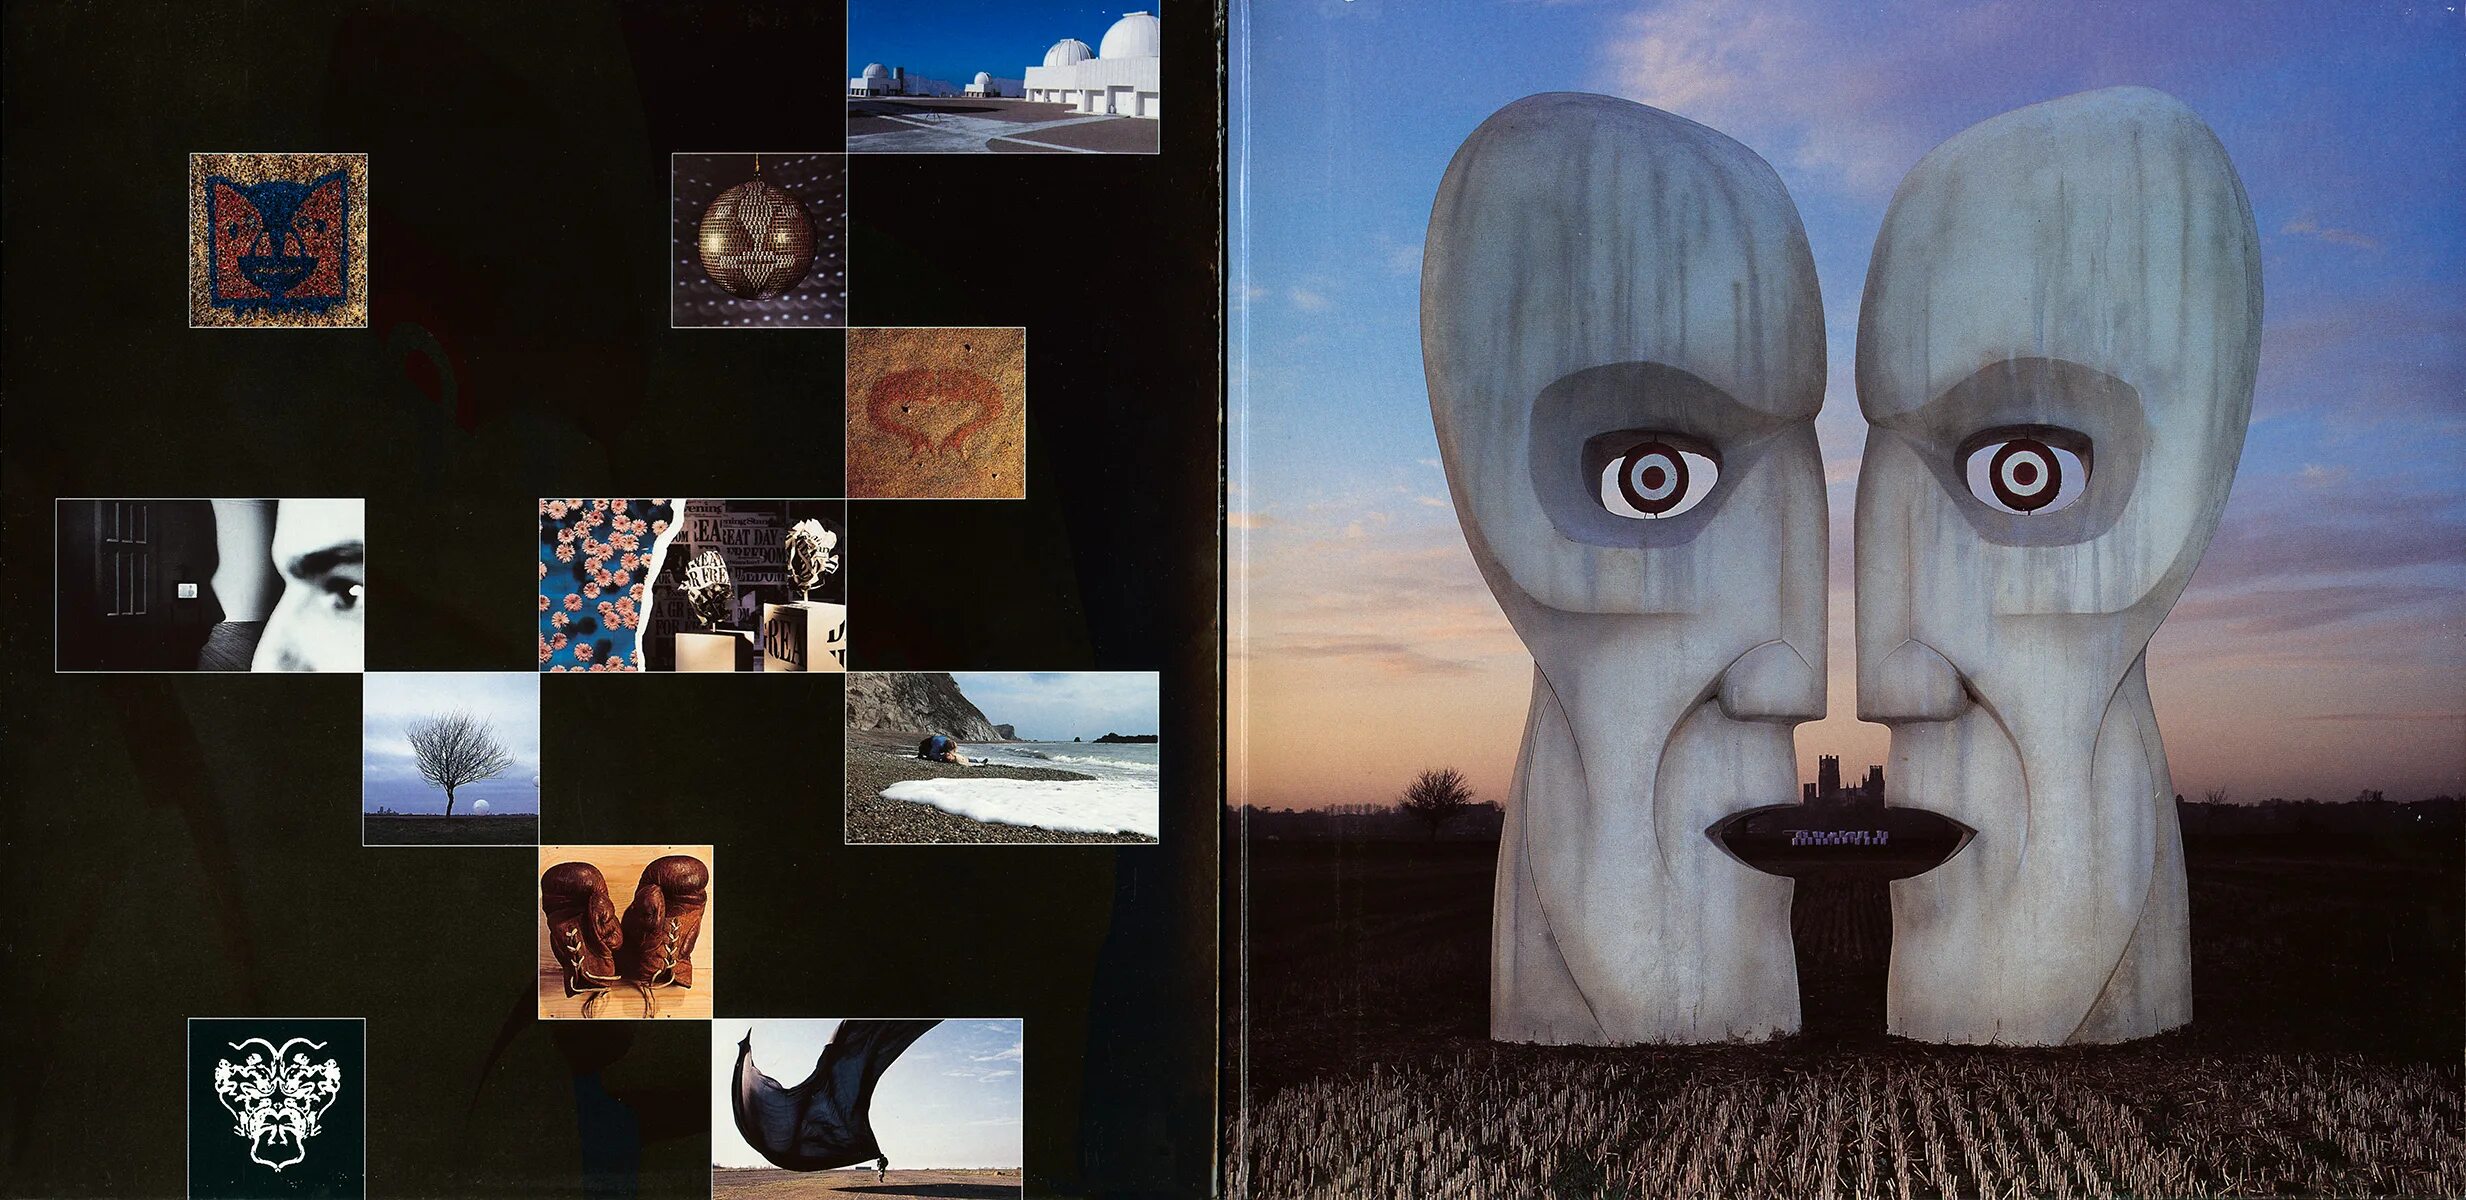 The division bell. Pink Floyd 1994 the Division Bell. Обложки Пинк Флойд Division Bell. Pink Floyd альбом Division Bell. The Division Bell 1994 LP.